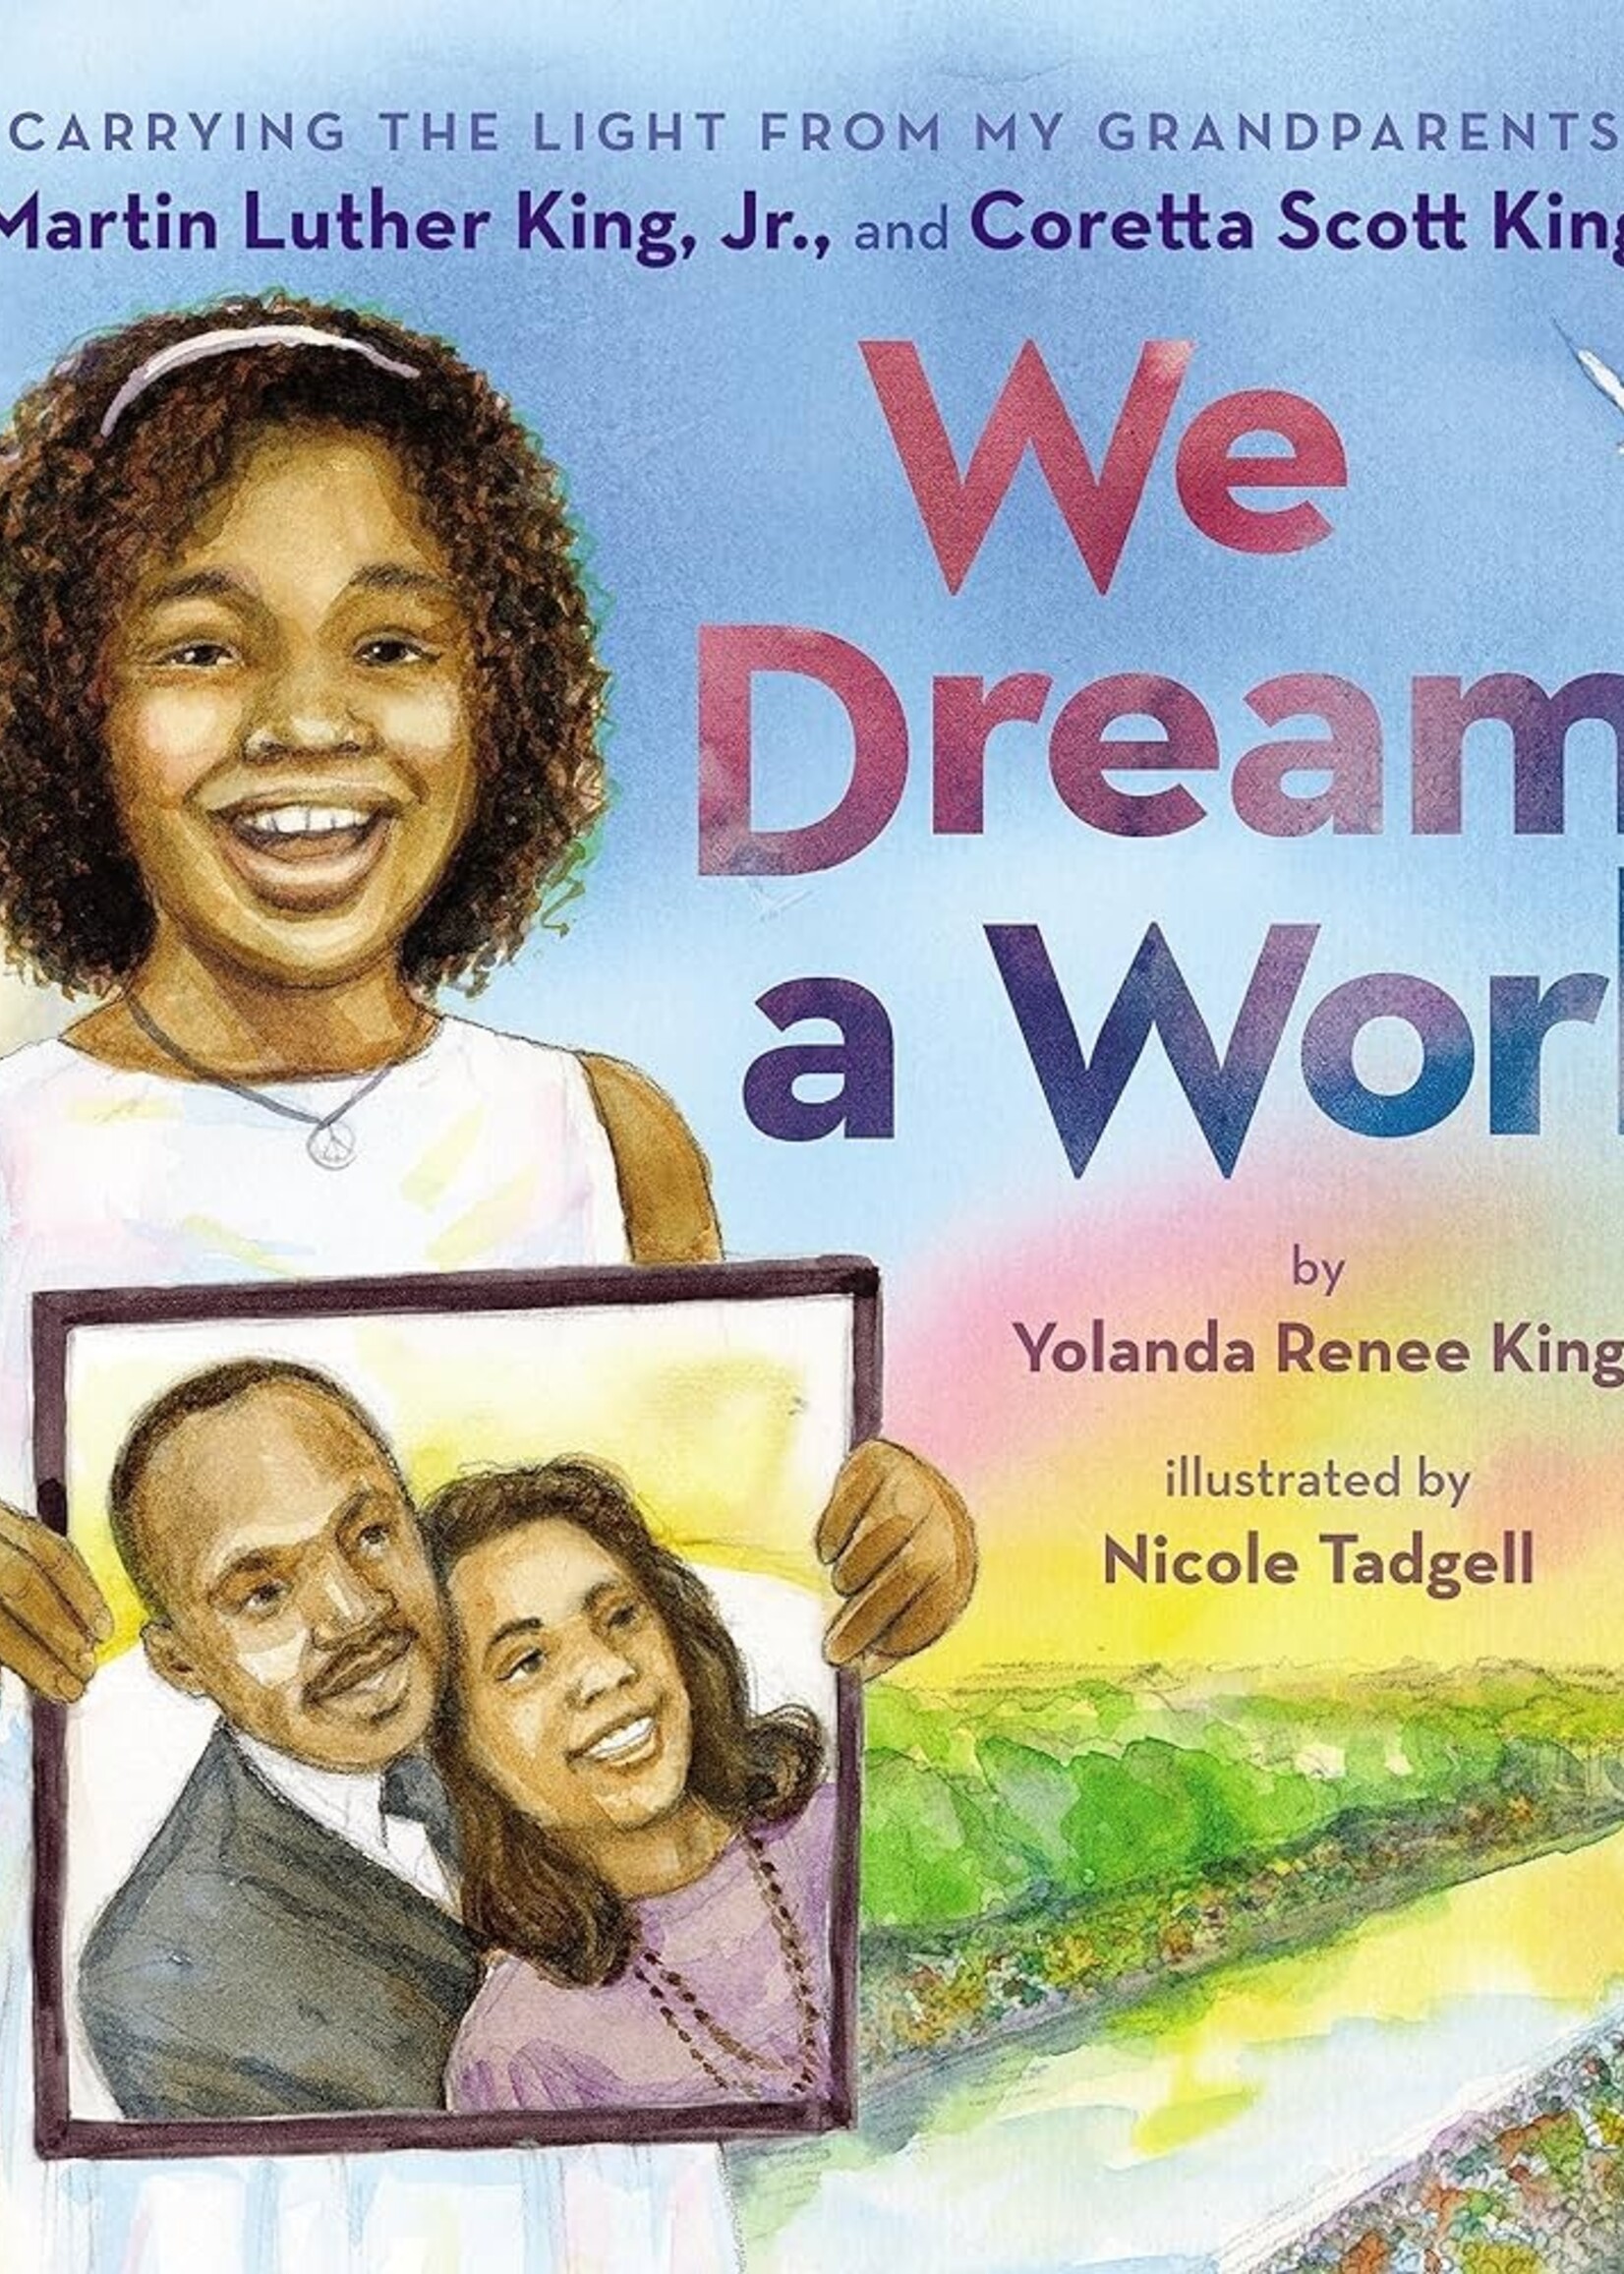 We Dream a World: Carrying the Light from My Grandparents Martin Luther King, Jr. and Coretta Scott King - Hardcover